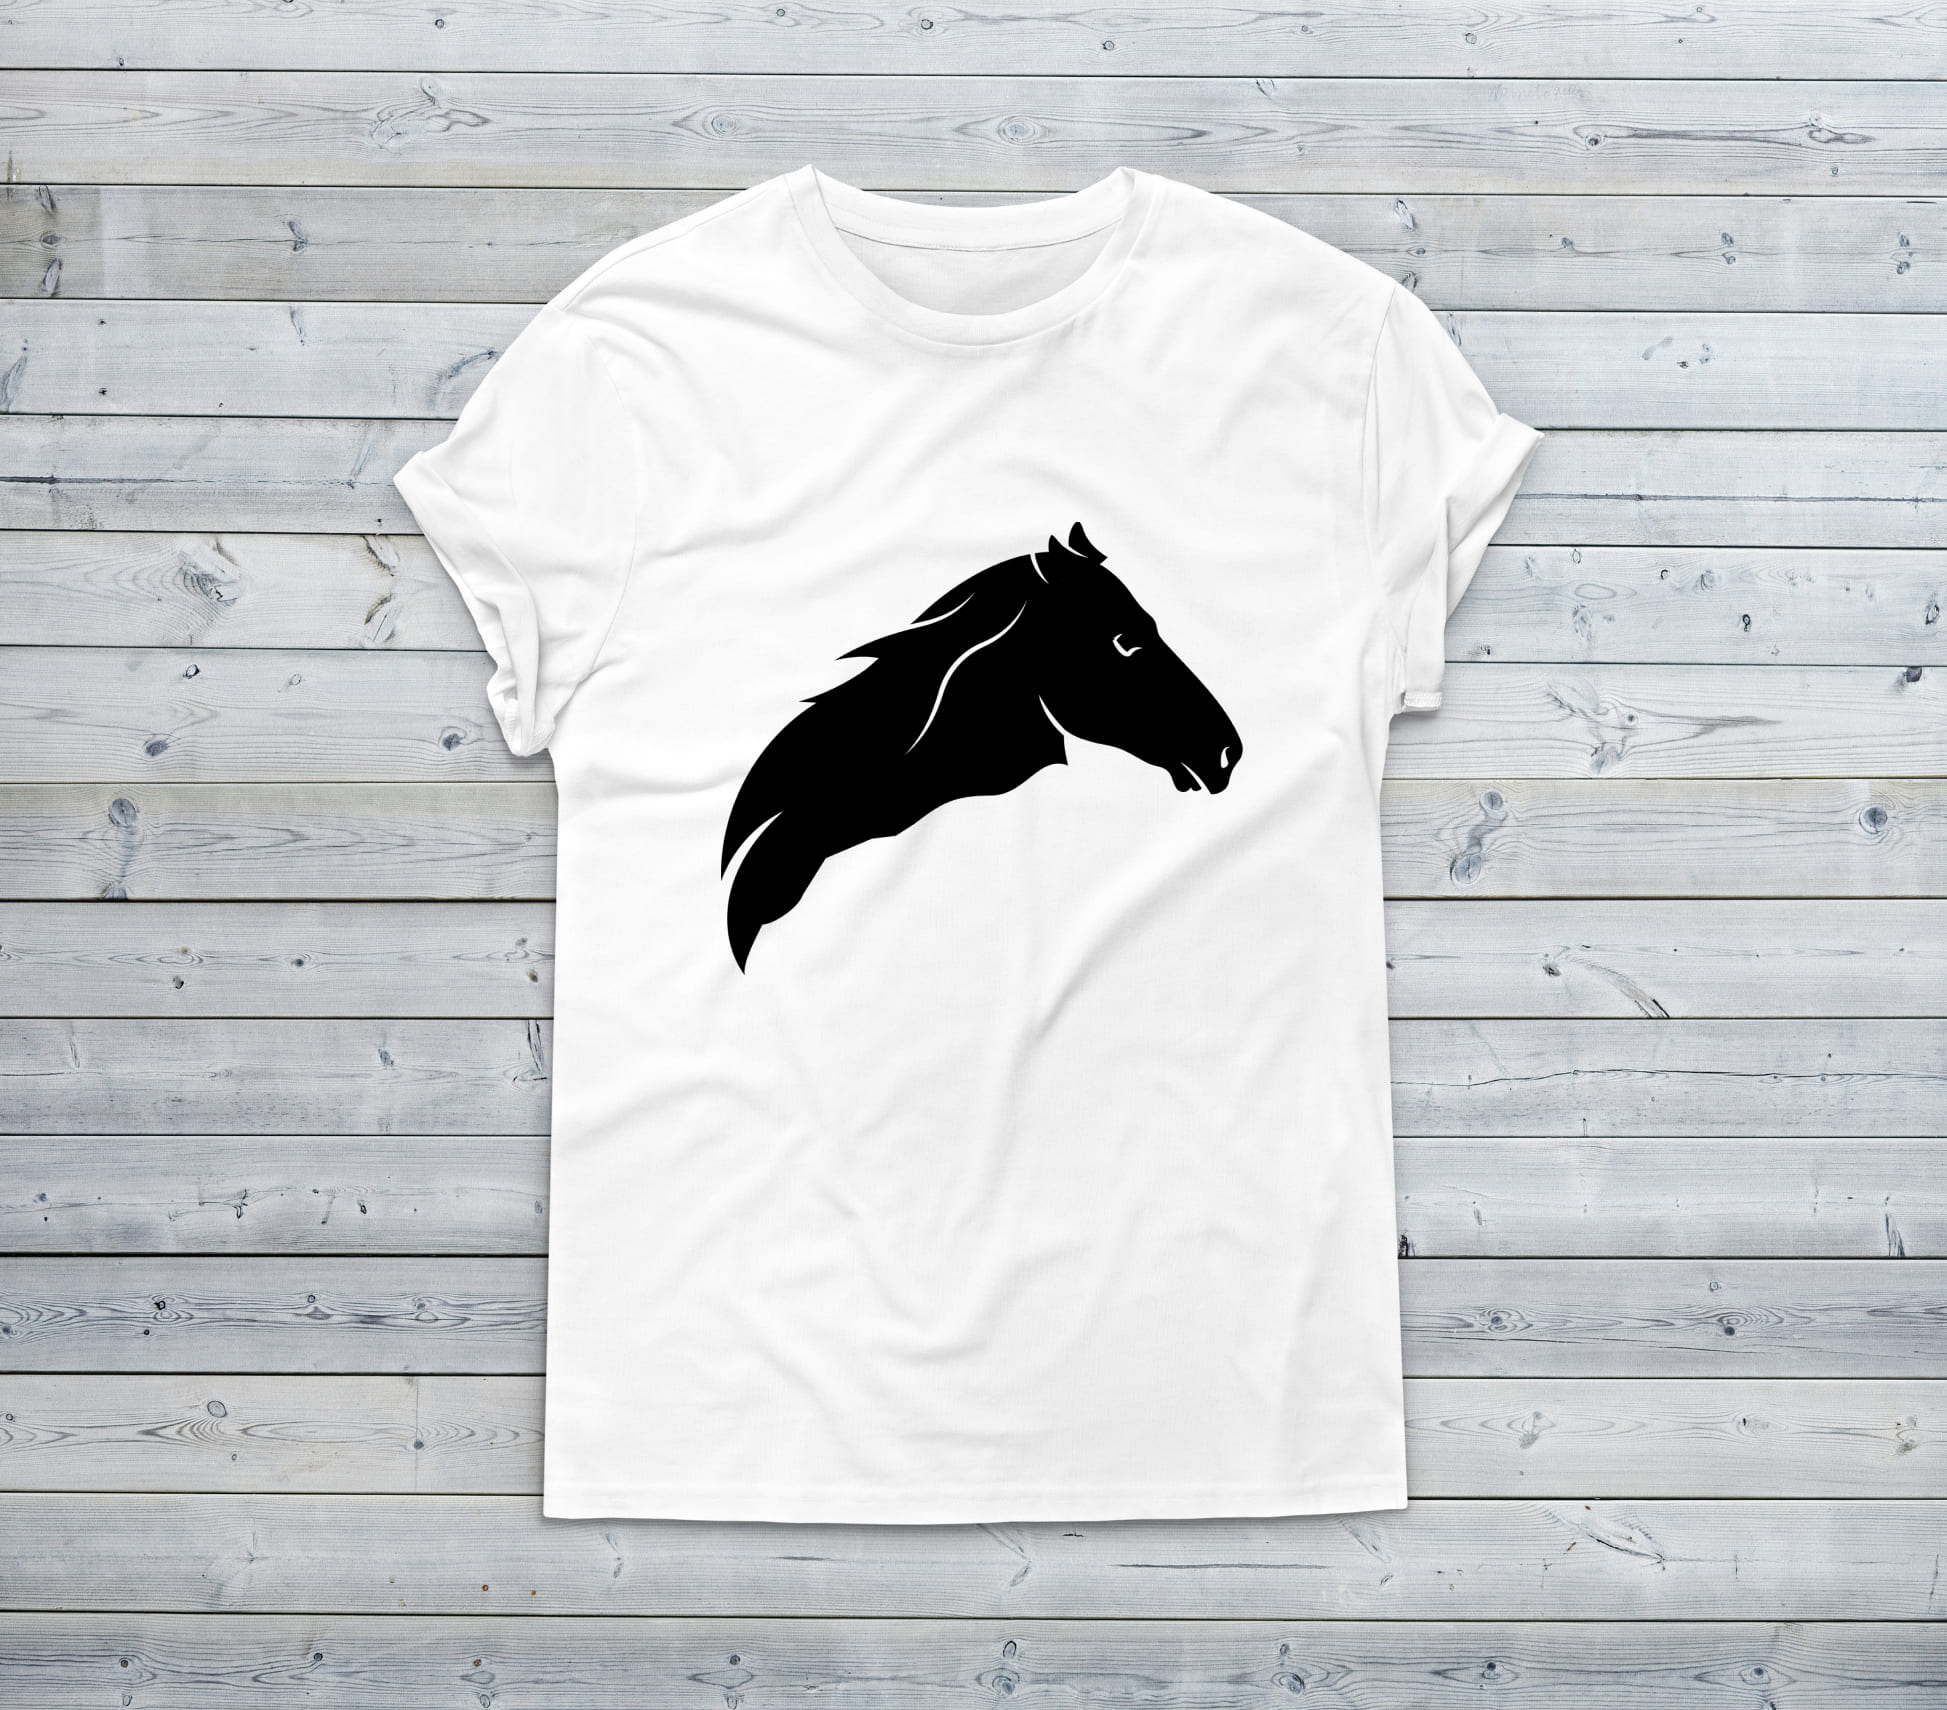 White t-shirt with a black horse head on a wooden background.